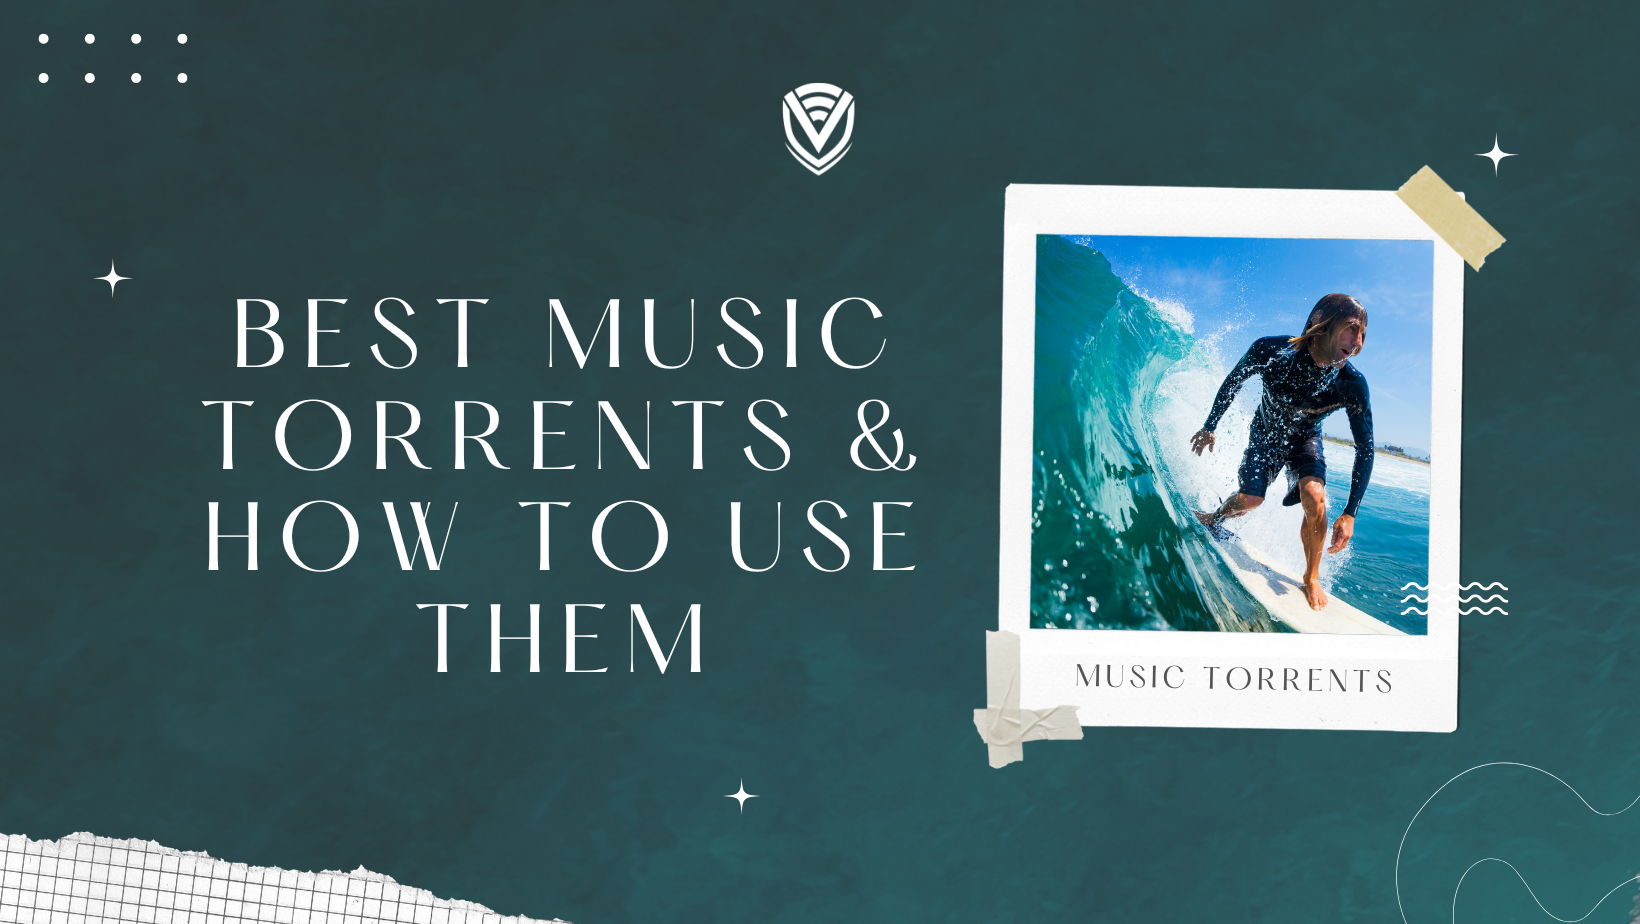 Best music torrents & how to use them